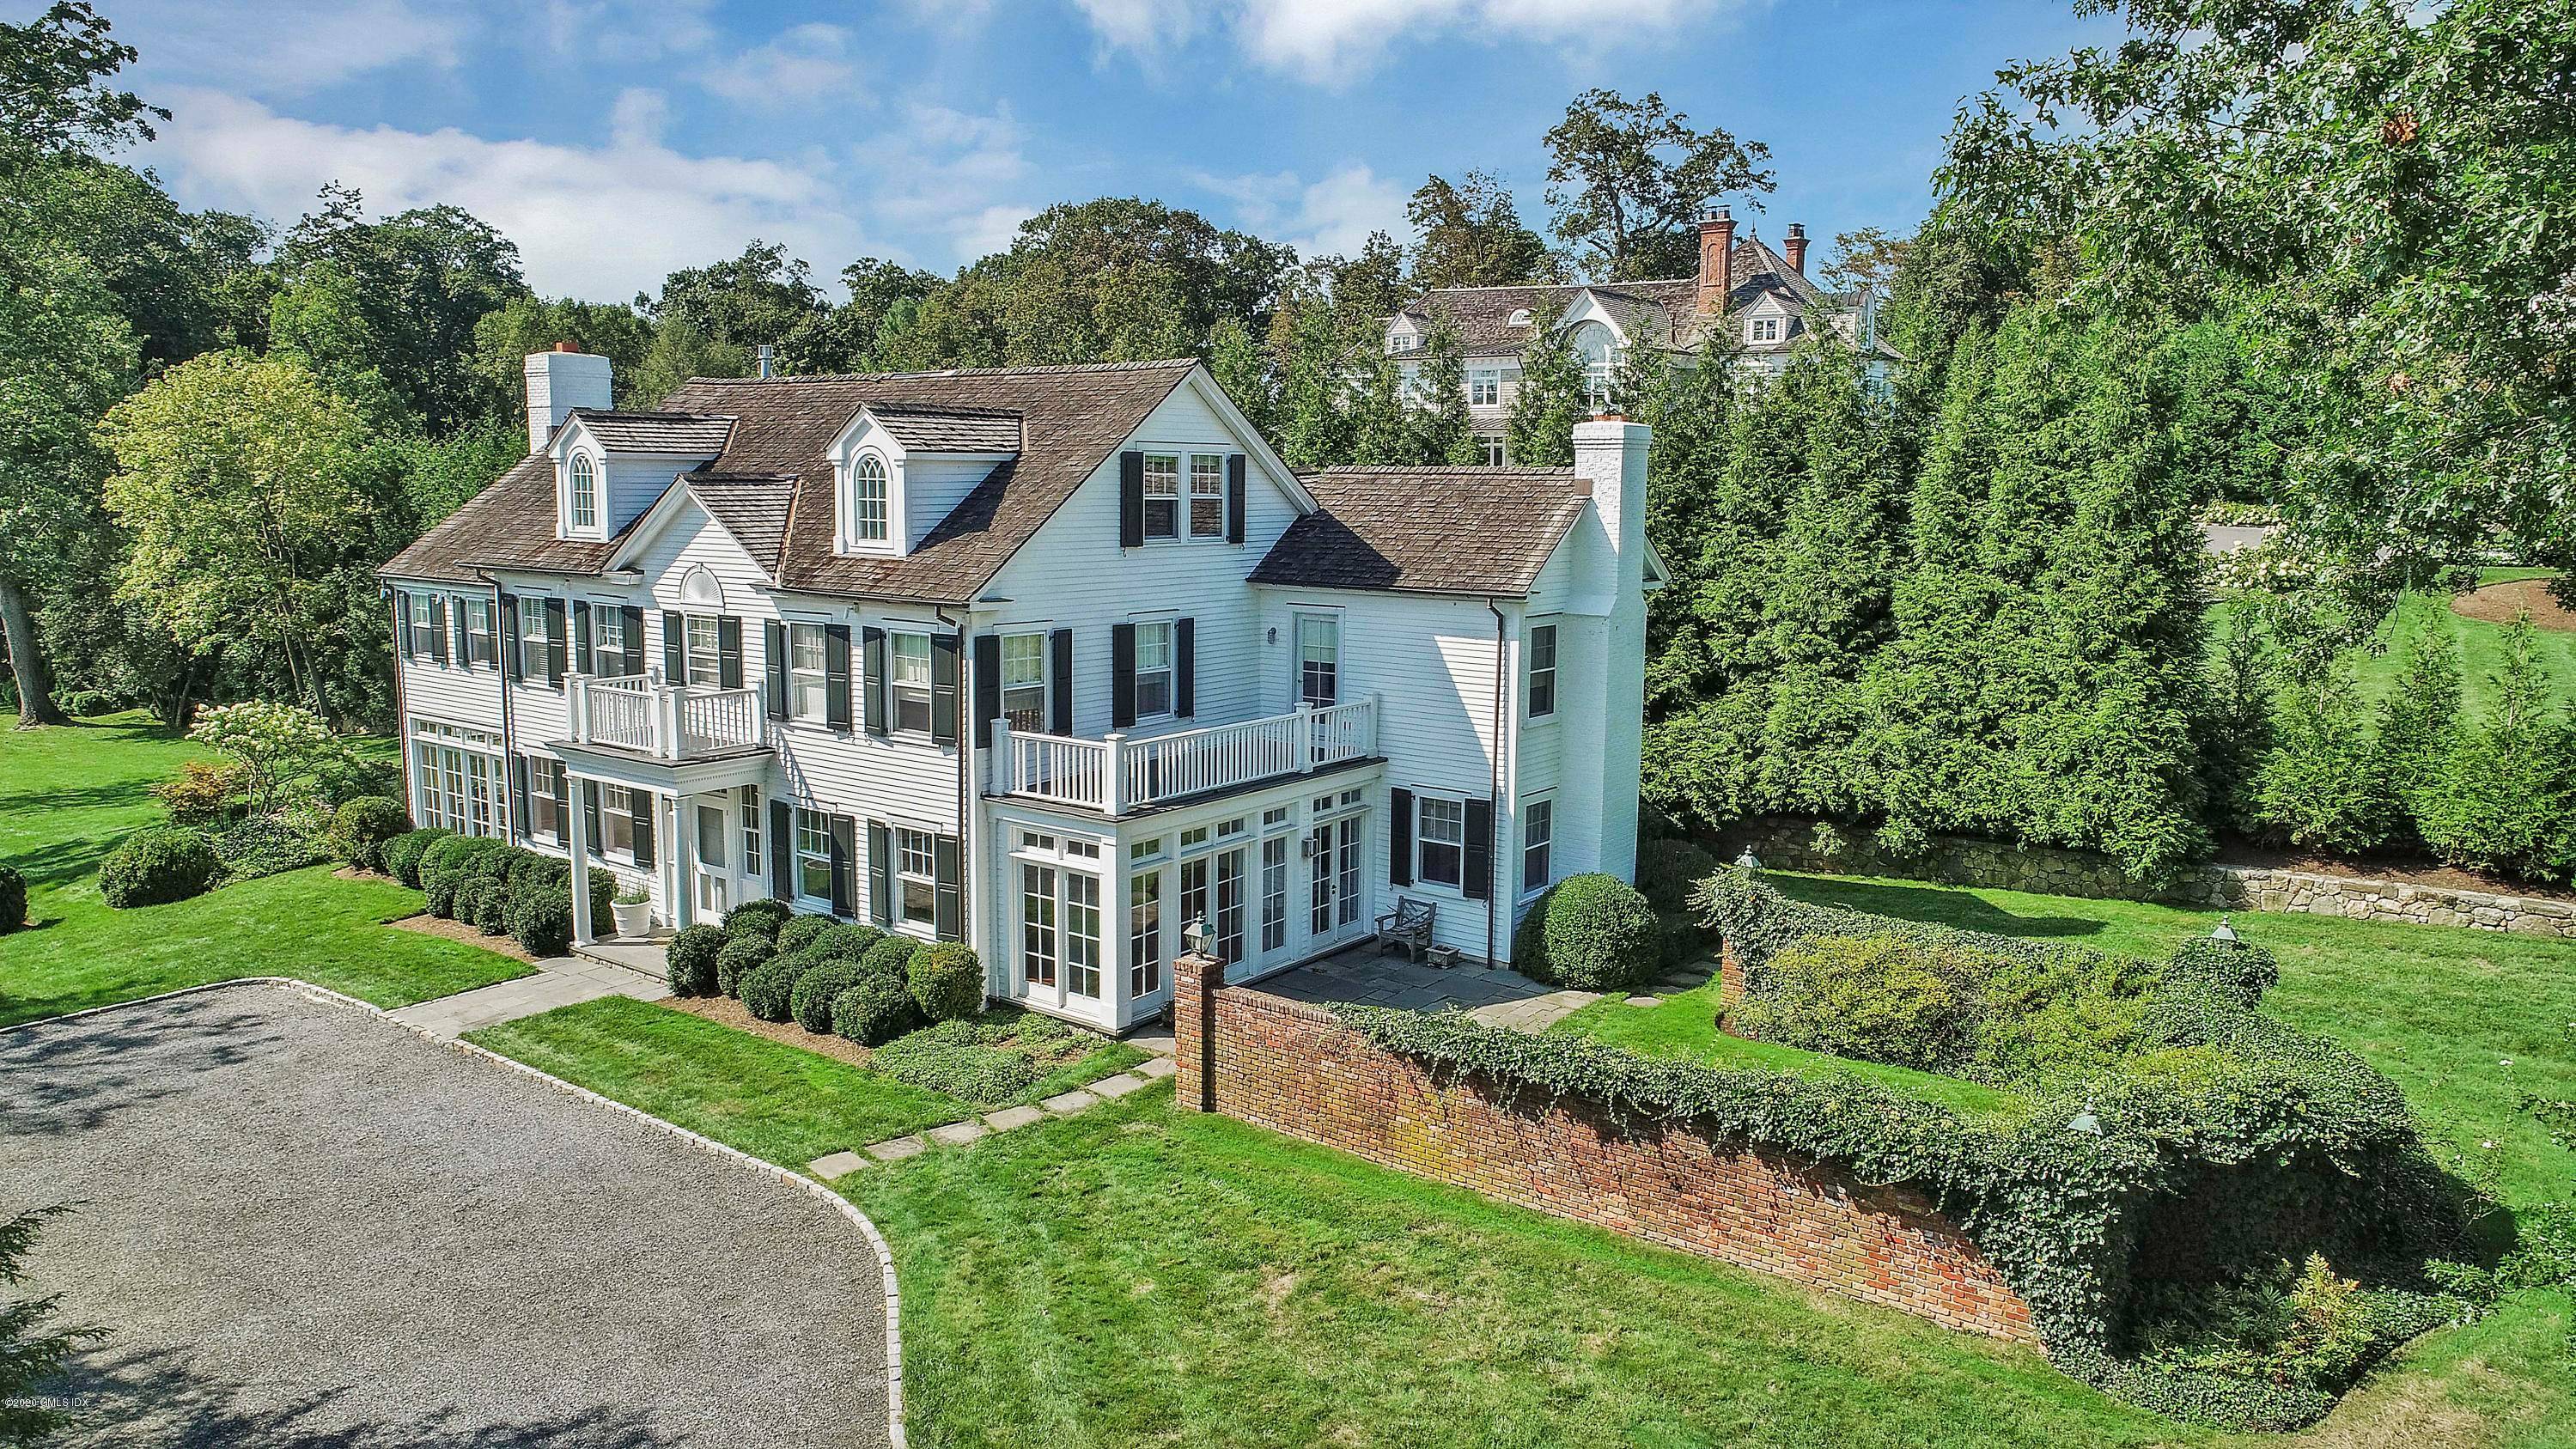 Belle Haven Association Timeless five bedroom Colonial boasts a sundrenched interior that combines chic updates with classic architectural details on a verdant.